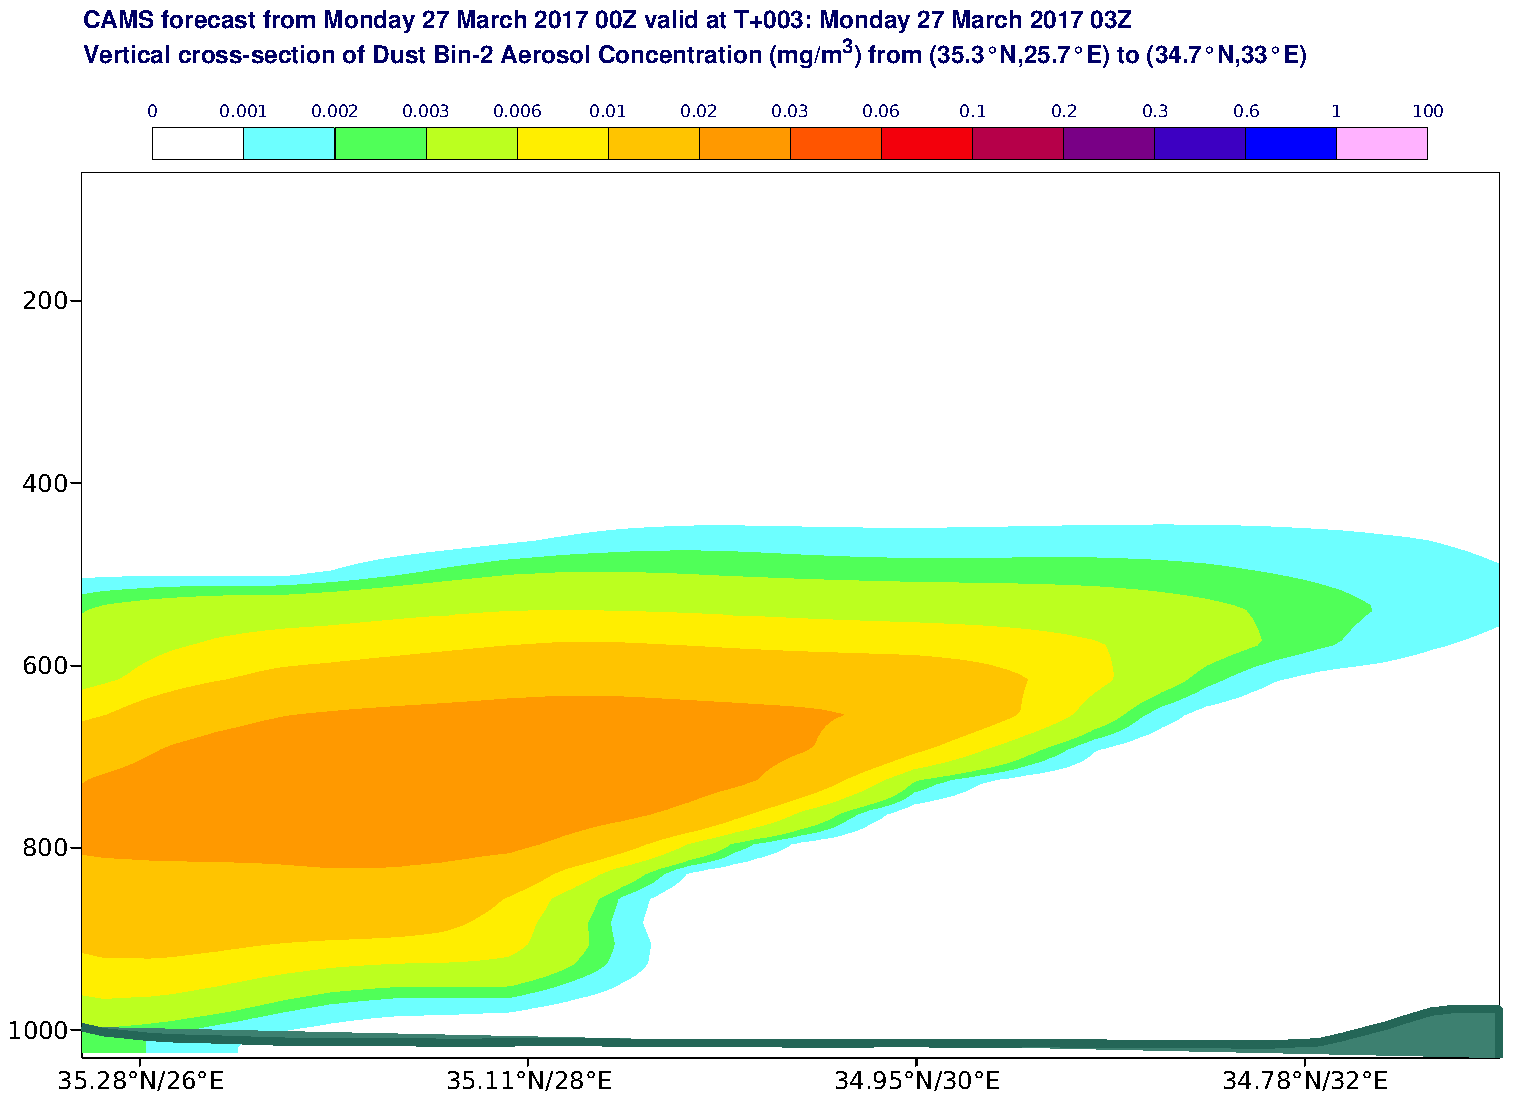 Vertical cross-section of Dust Bin-2 Aerosol Concentration (mg/m3) valid at T3 - 2017-03-27 03:00